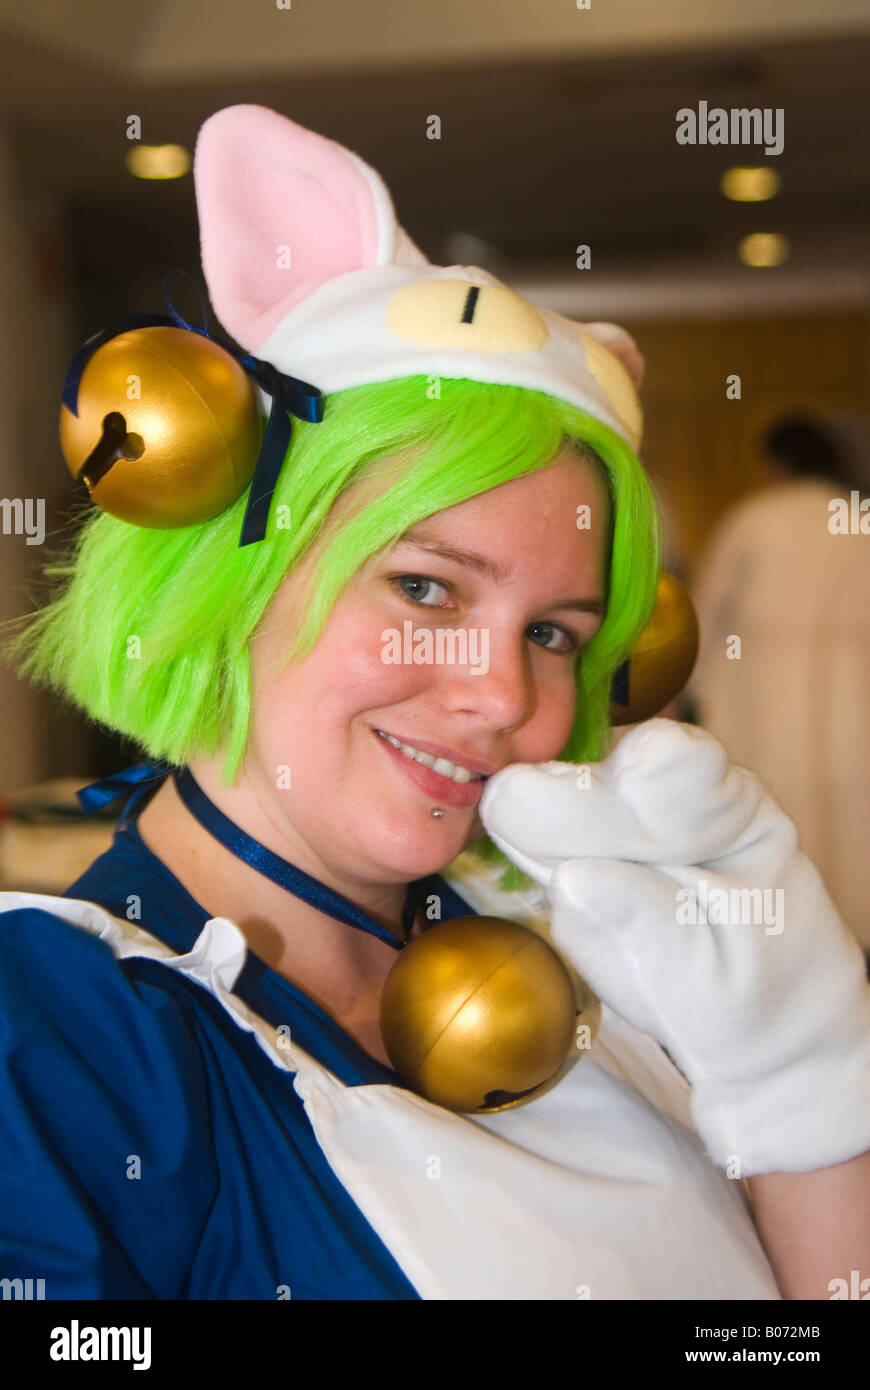 Boxbox riven coseplay  Cosplay, League of legends, Cute